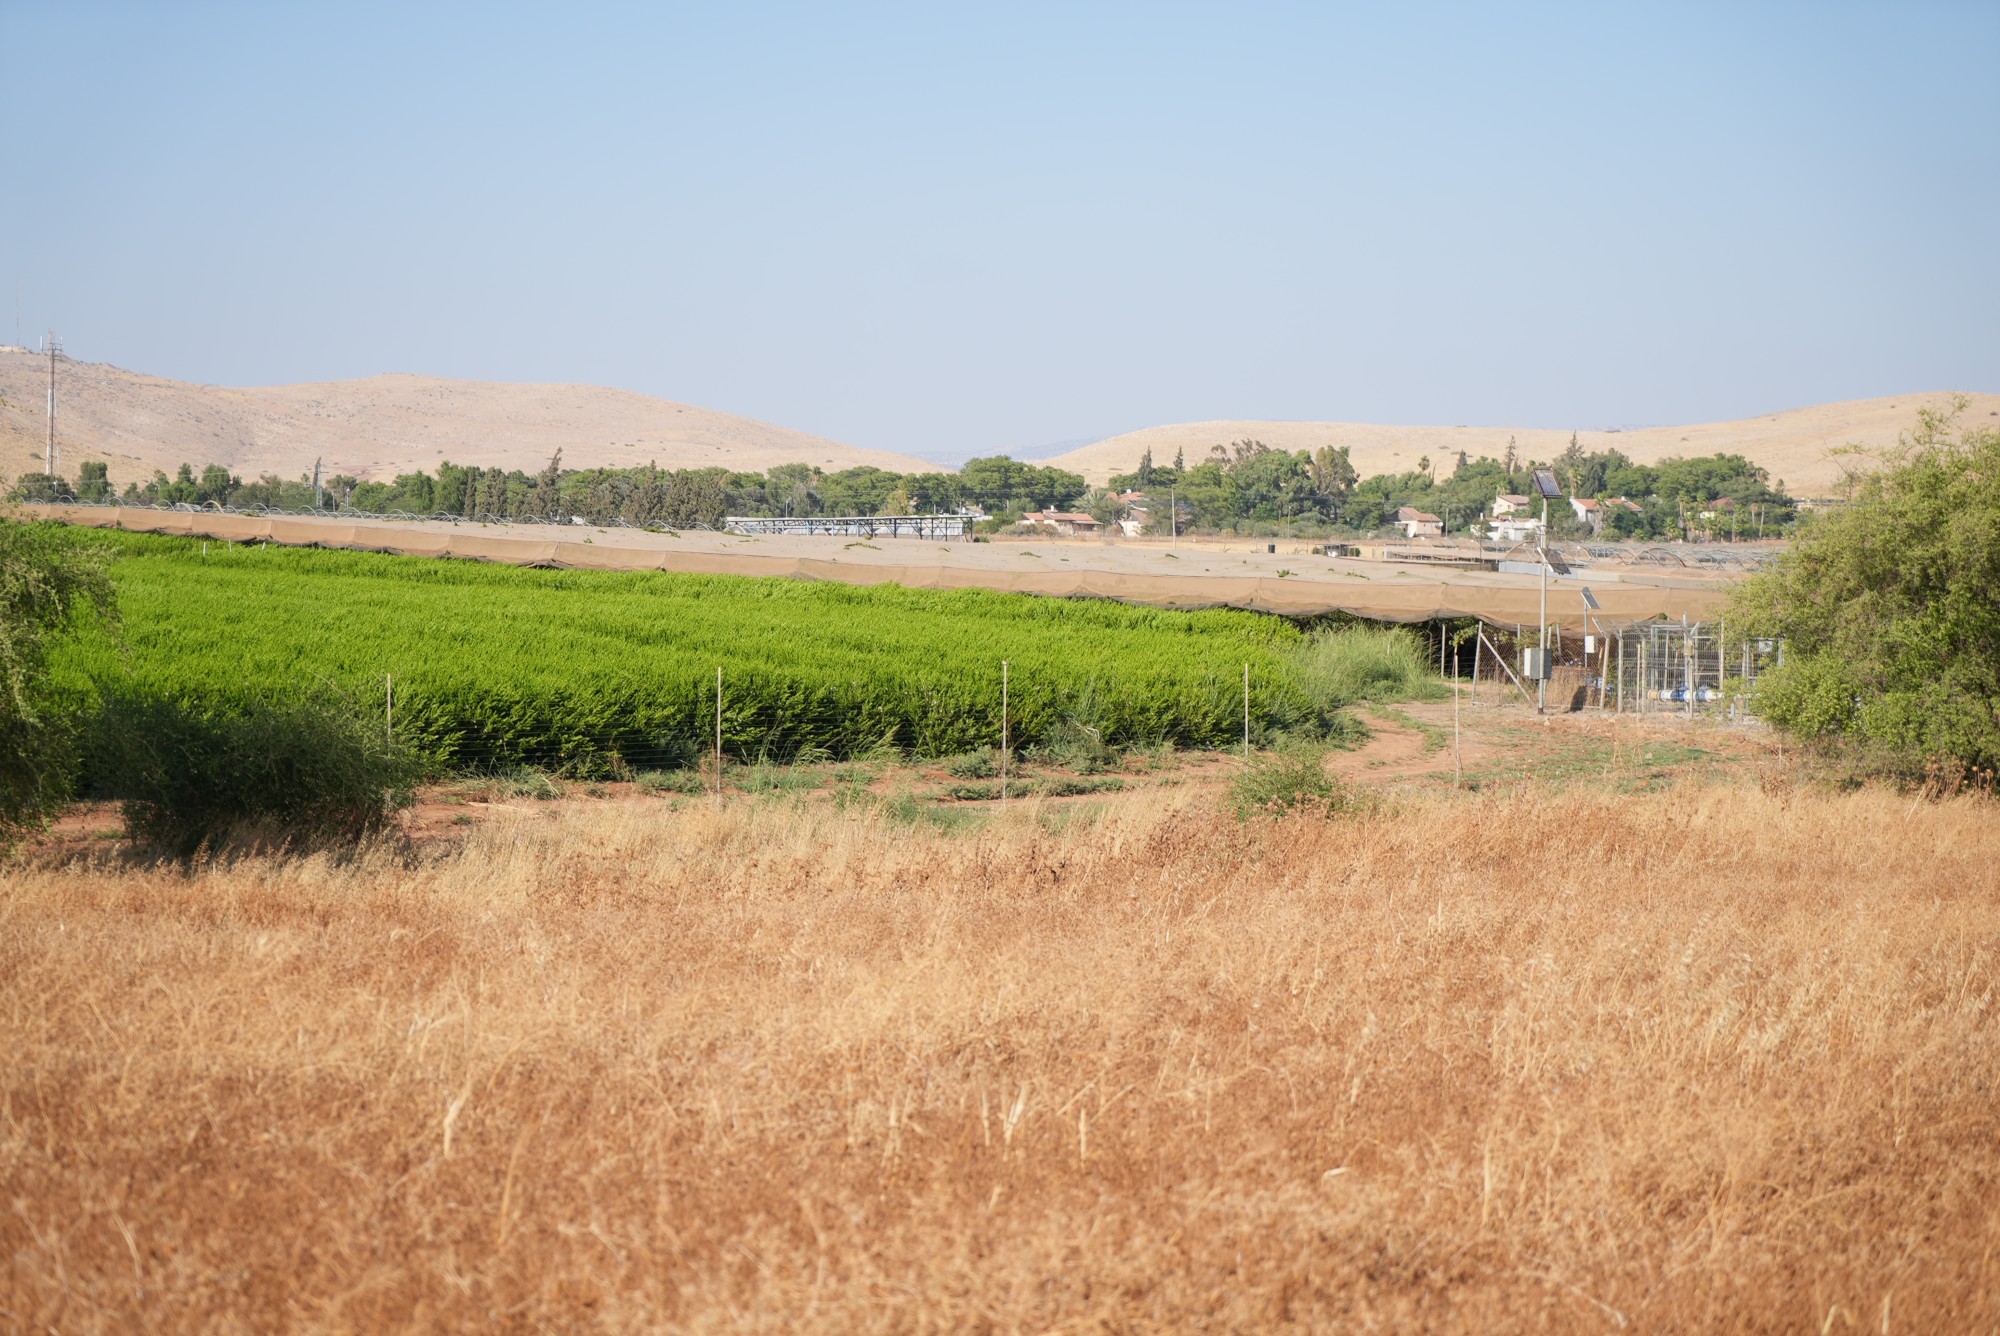 Greenhouses and lush farmland lie behind the Bekaot settlement, only two km away from the dry landscape of Khirbet Humsah (MEE/Akram al-Waara)